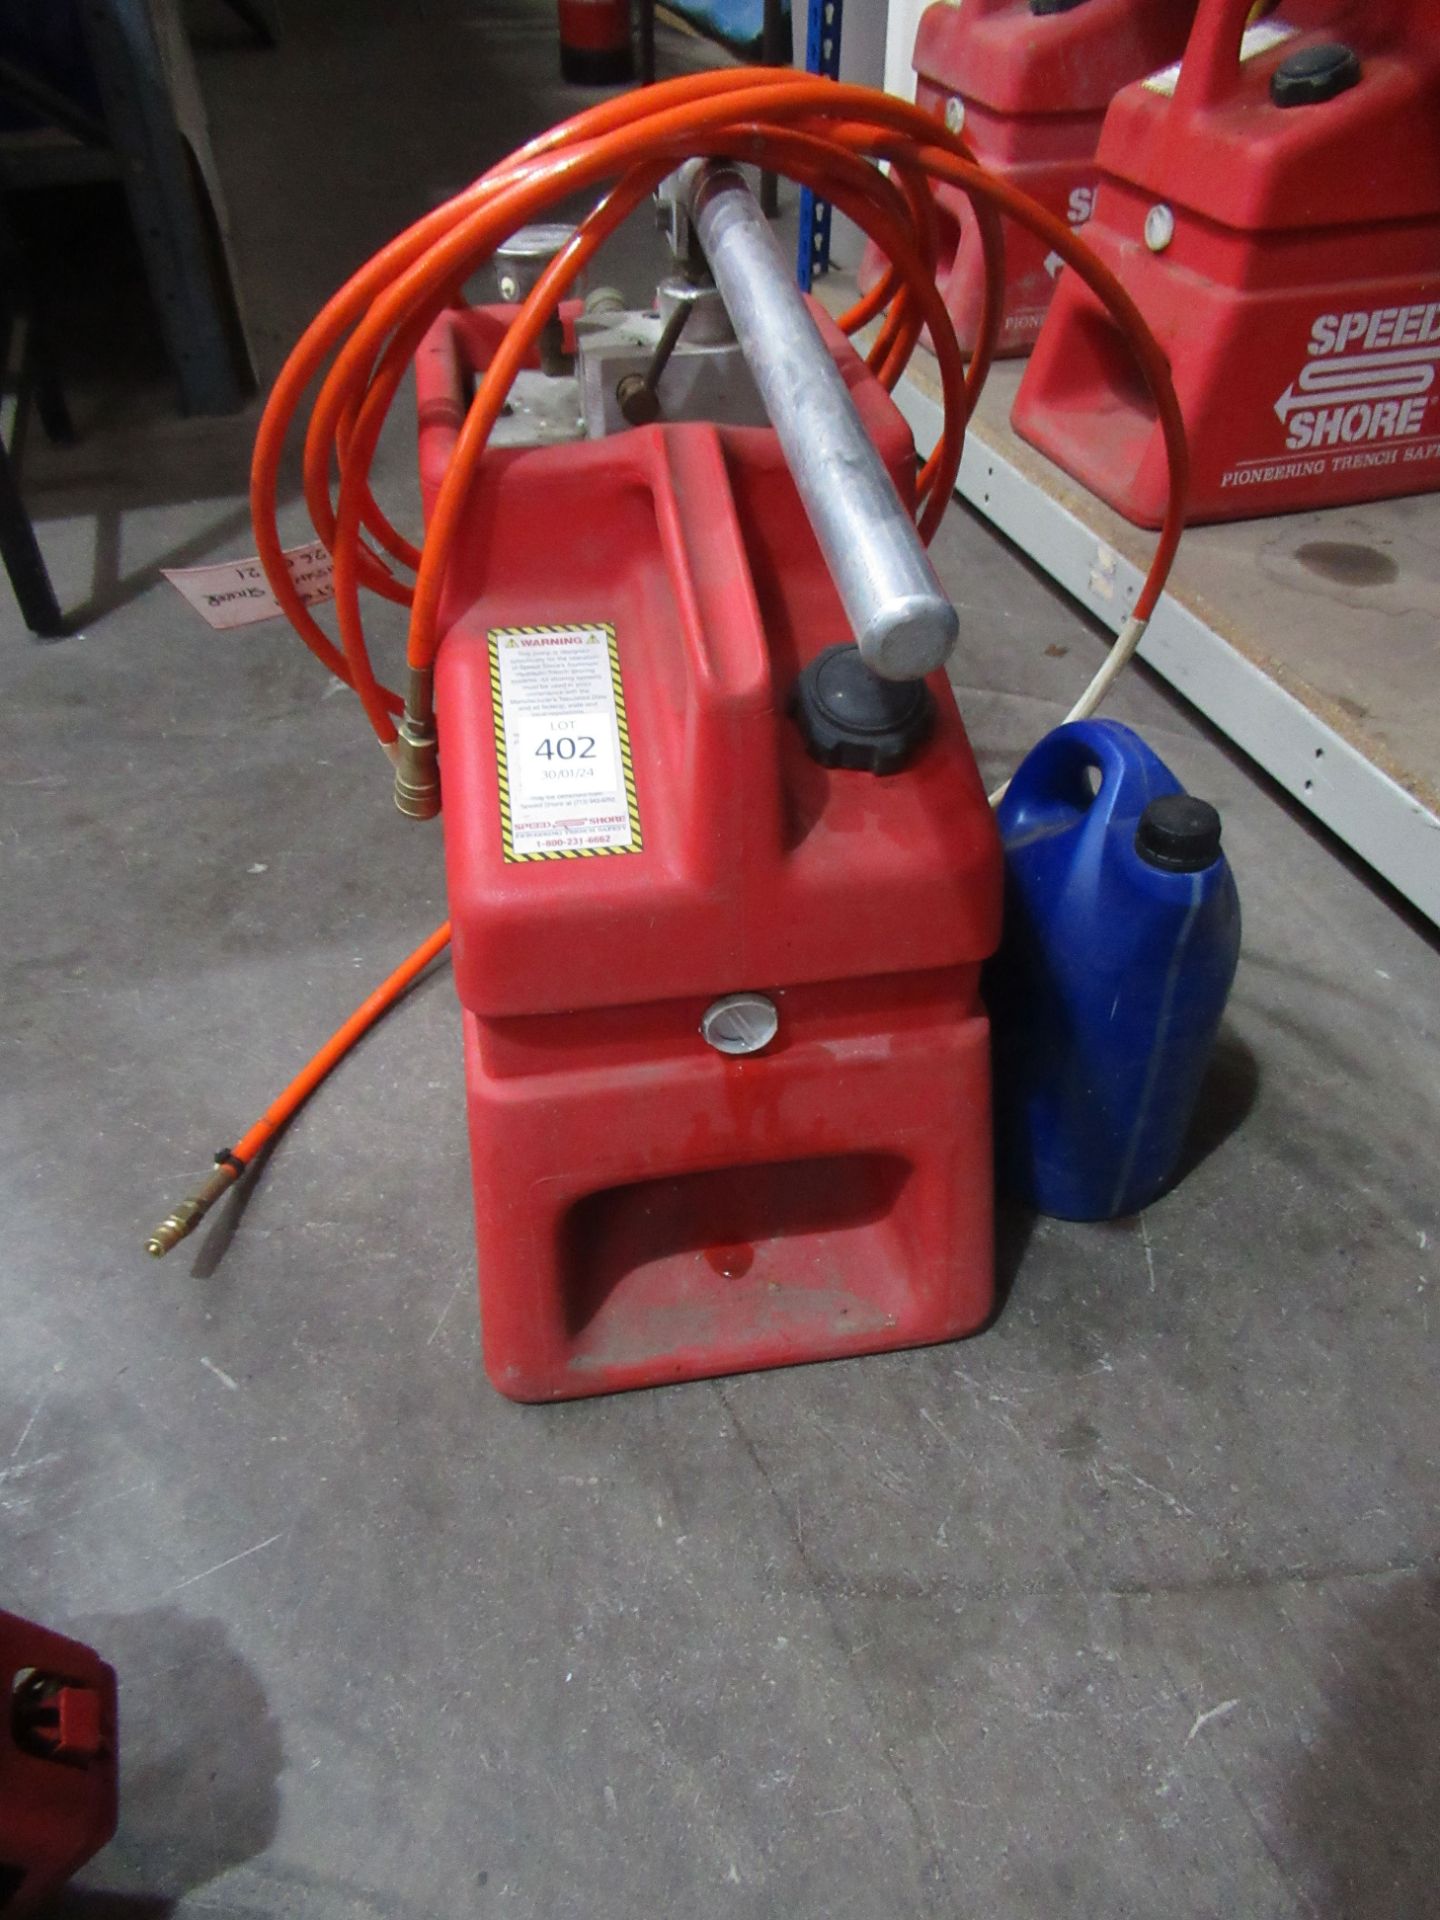 3x Speed Shore Manual Hydraulic Hand Pumps - Image 7 of 7